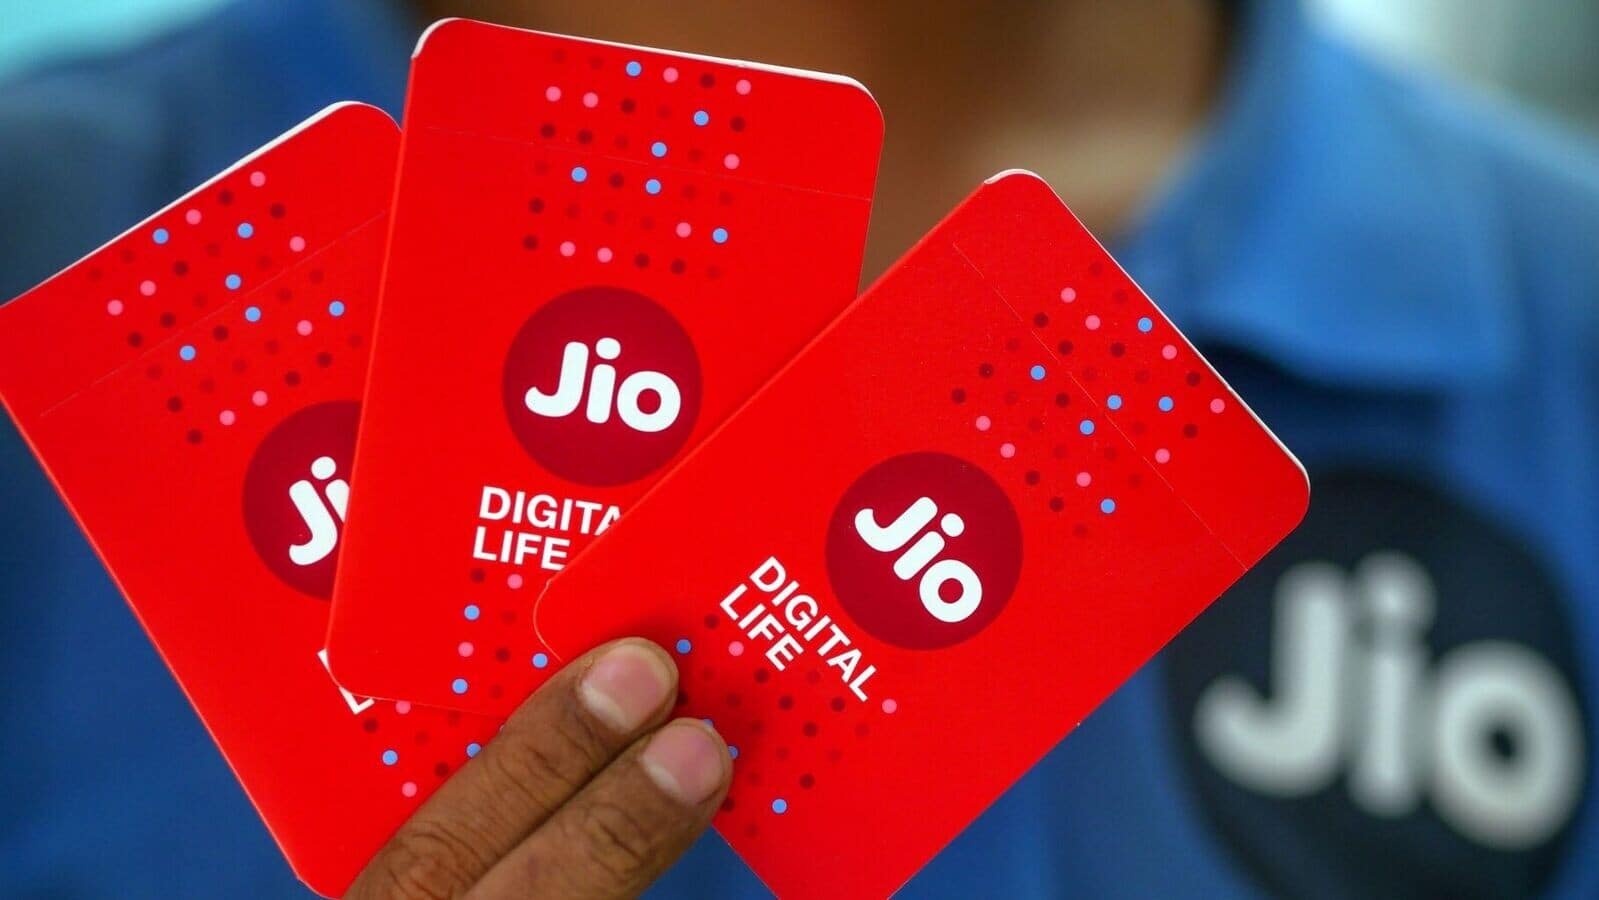 Jio, Airtel raise prices today: Here's all about new plans